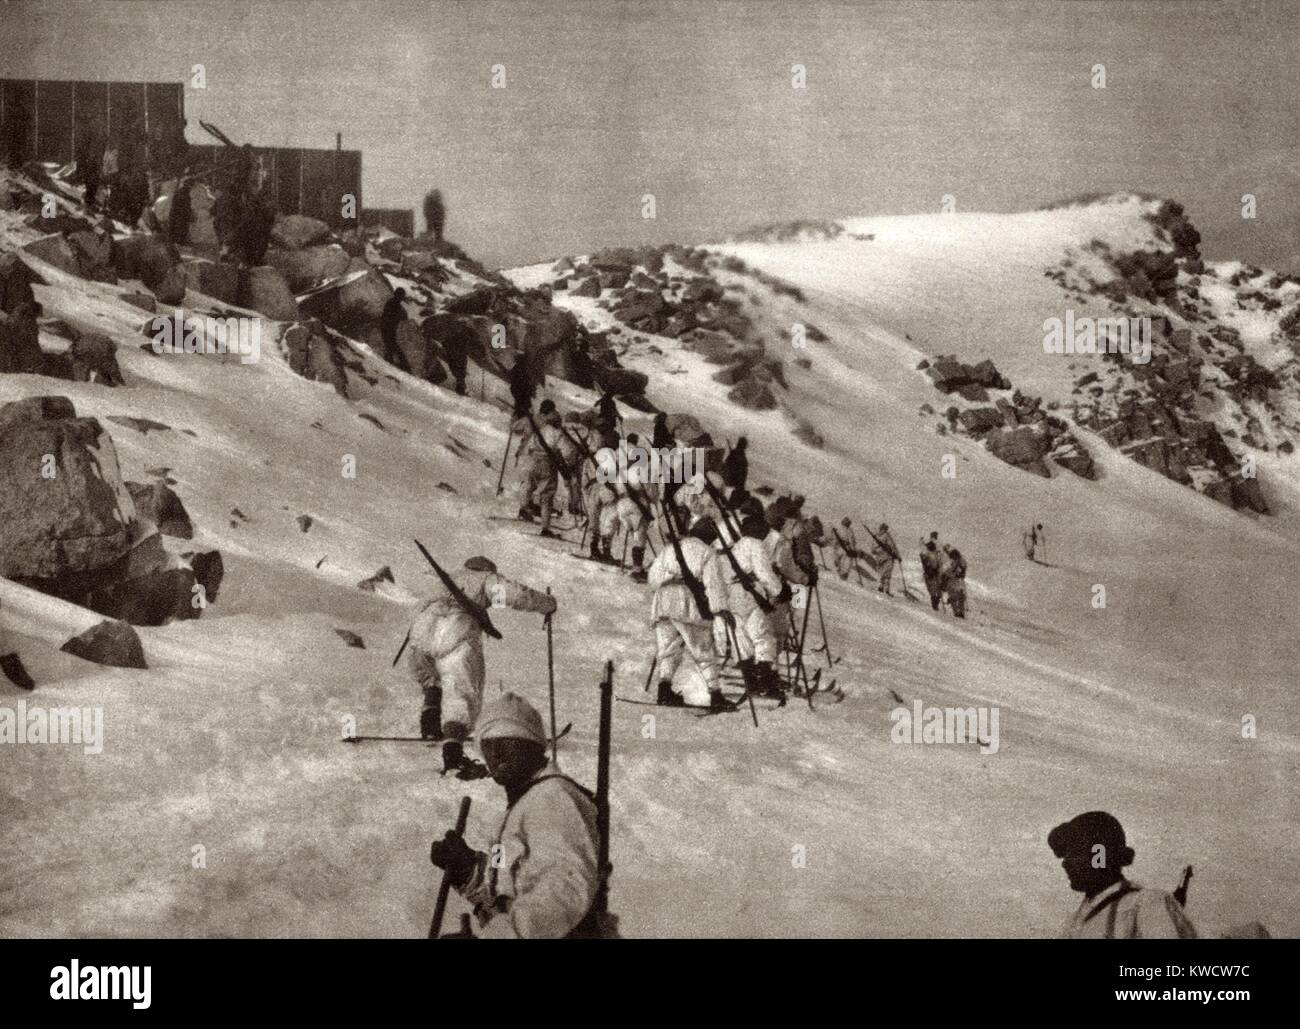 World War 1 in the Italian and Austria Alps. Italian troops skiing in single file, in white uniforms so they will blend in with the snow. They will get close to Austrian lines before being detected. Ca. 1915-18. (BSLOC 2013 1 20) Stock Photo